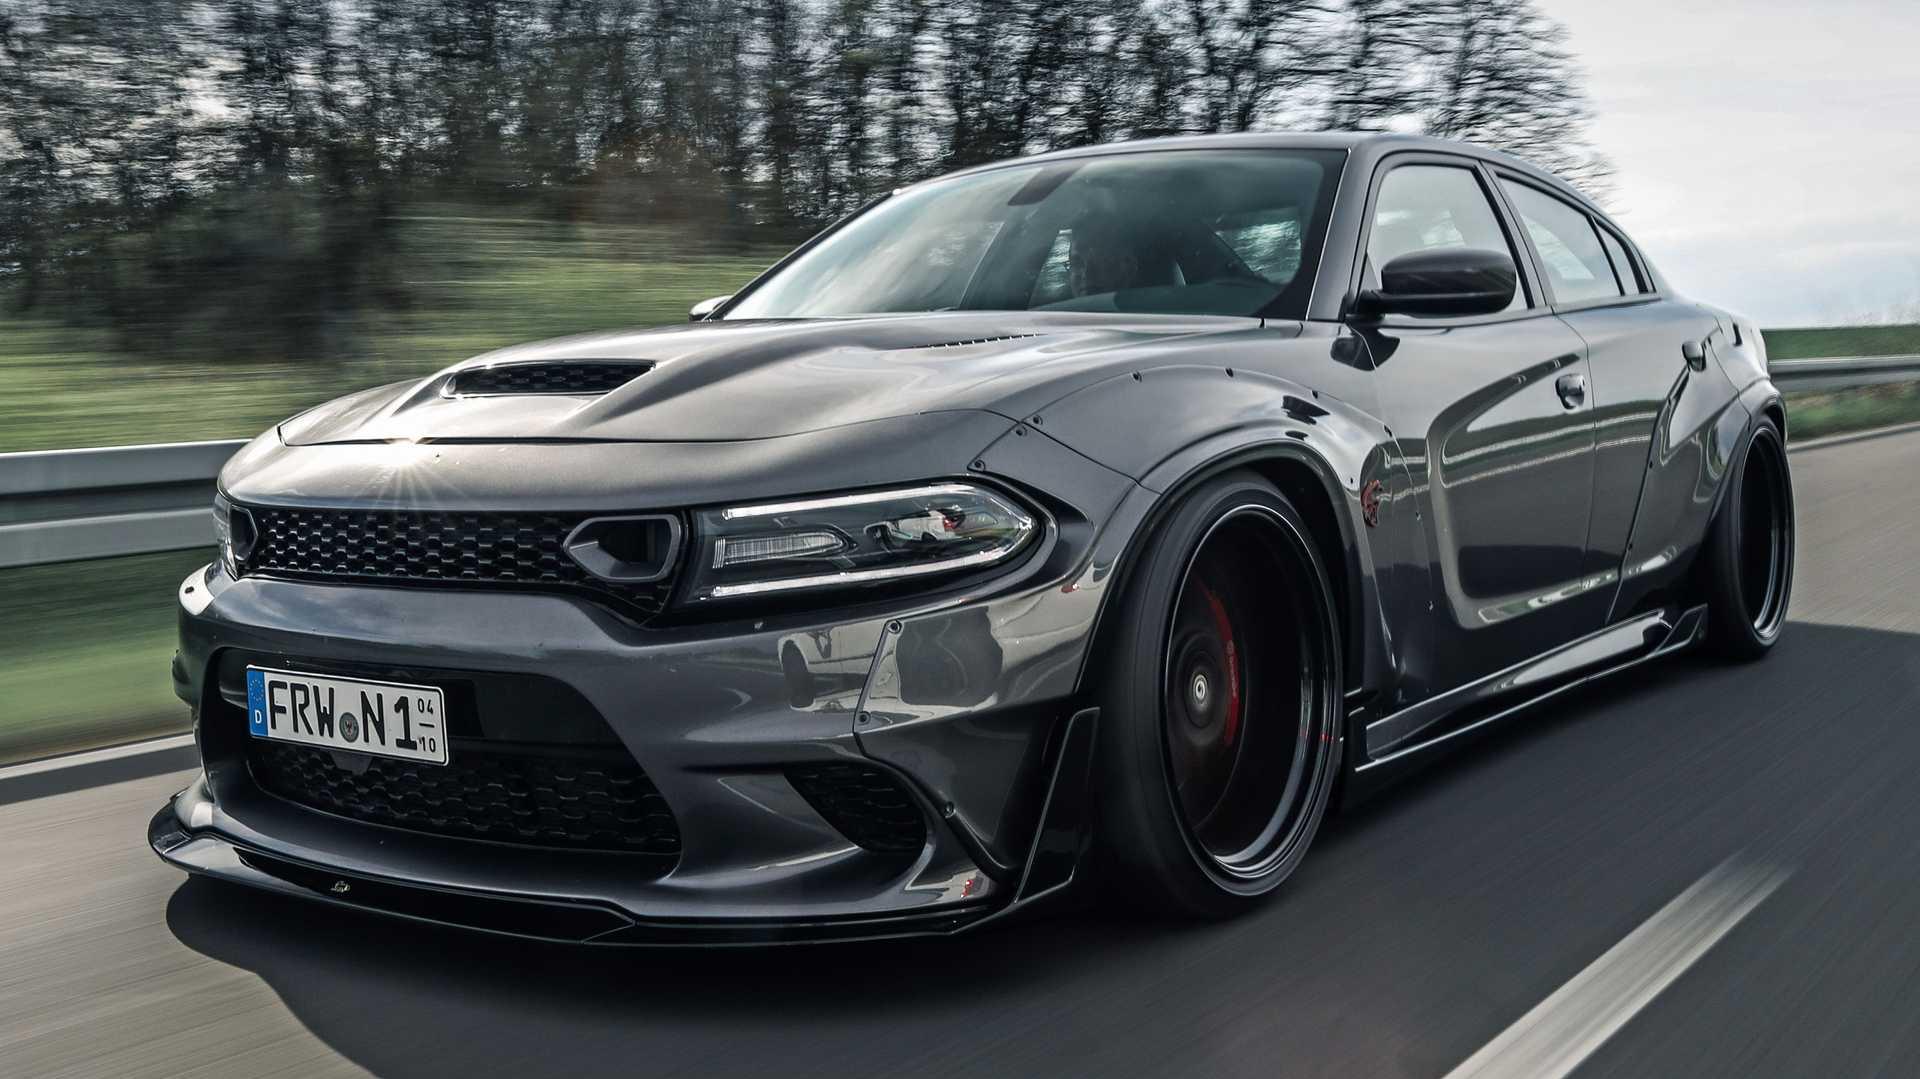 Dodge Charger SRT Hellcat Widebody By Bader Is A Sinister Sedan